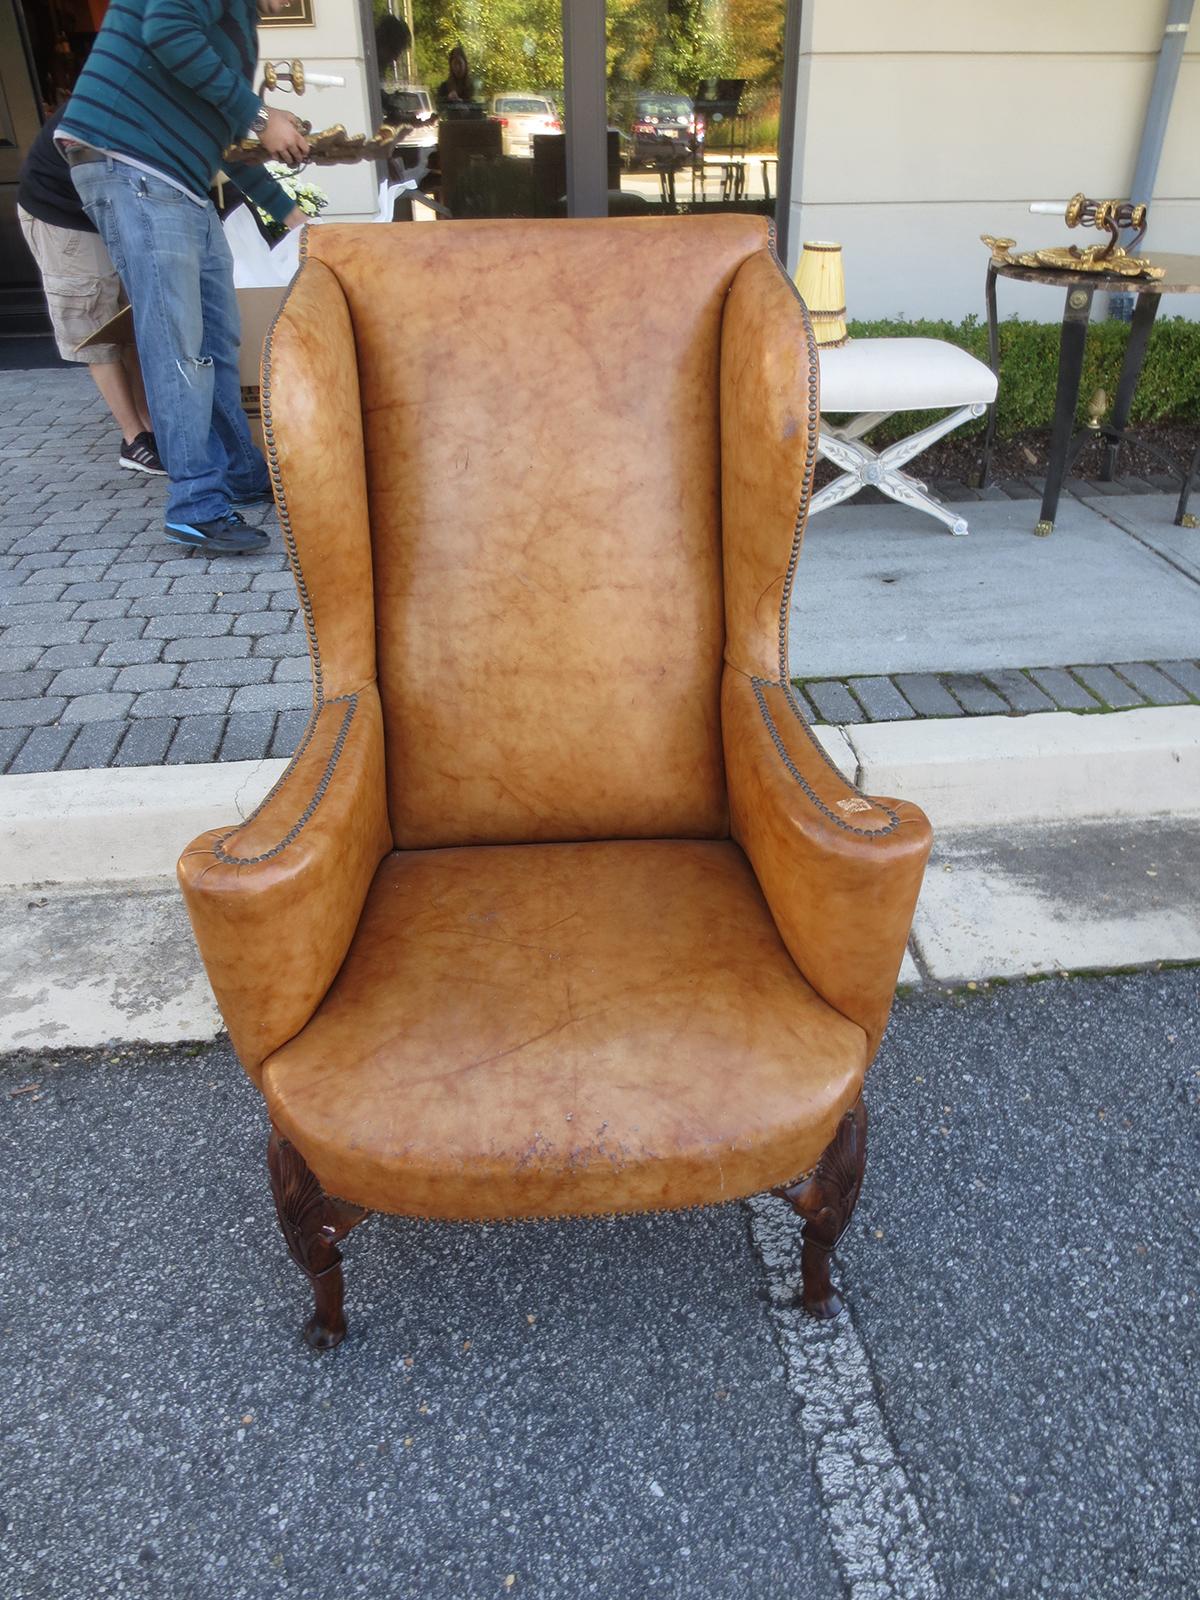 19th century English Georgian style wing chair in leather with well carved walnut cabriole legs and shell motif.
26.75